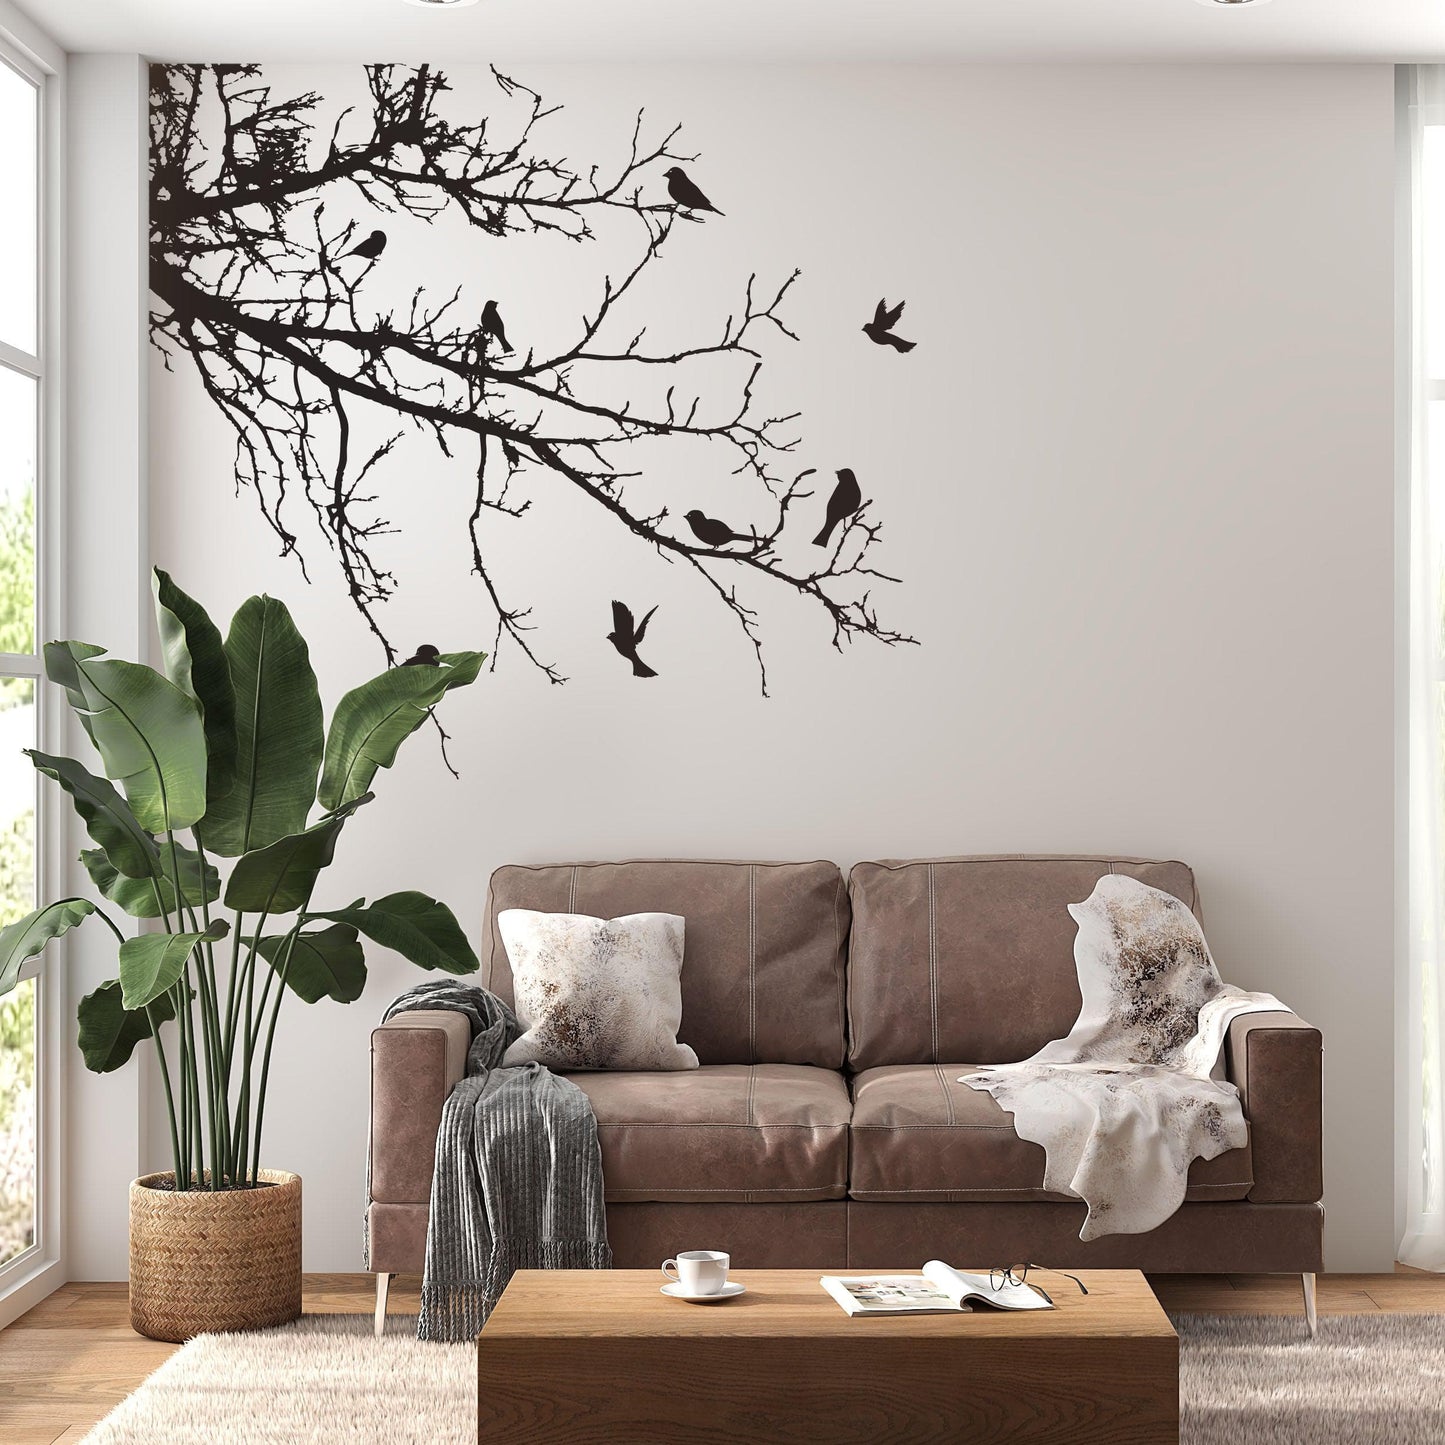 Black decal of 8 birds on tree branches on a white wall above a brown couch and leaves.